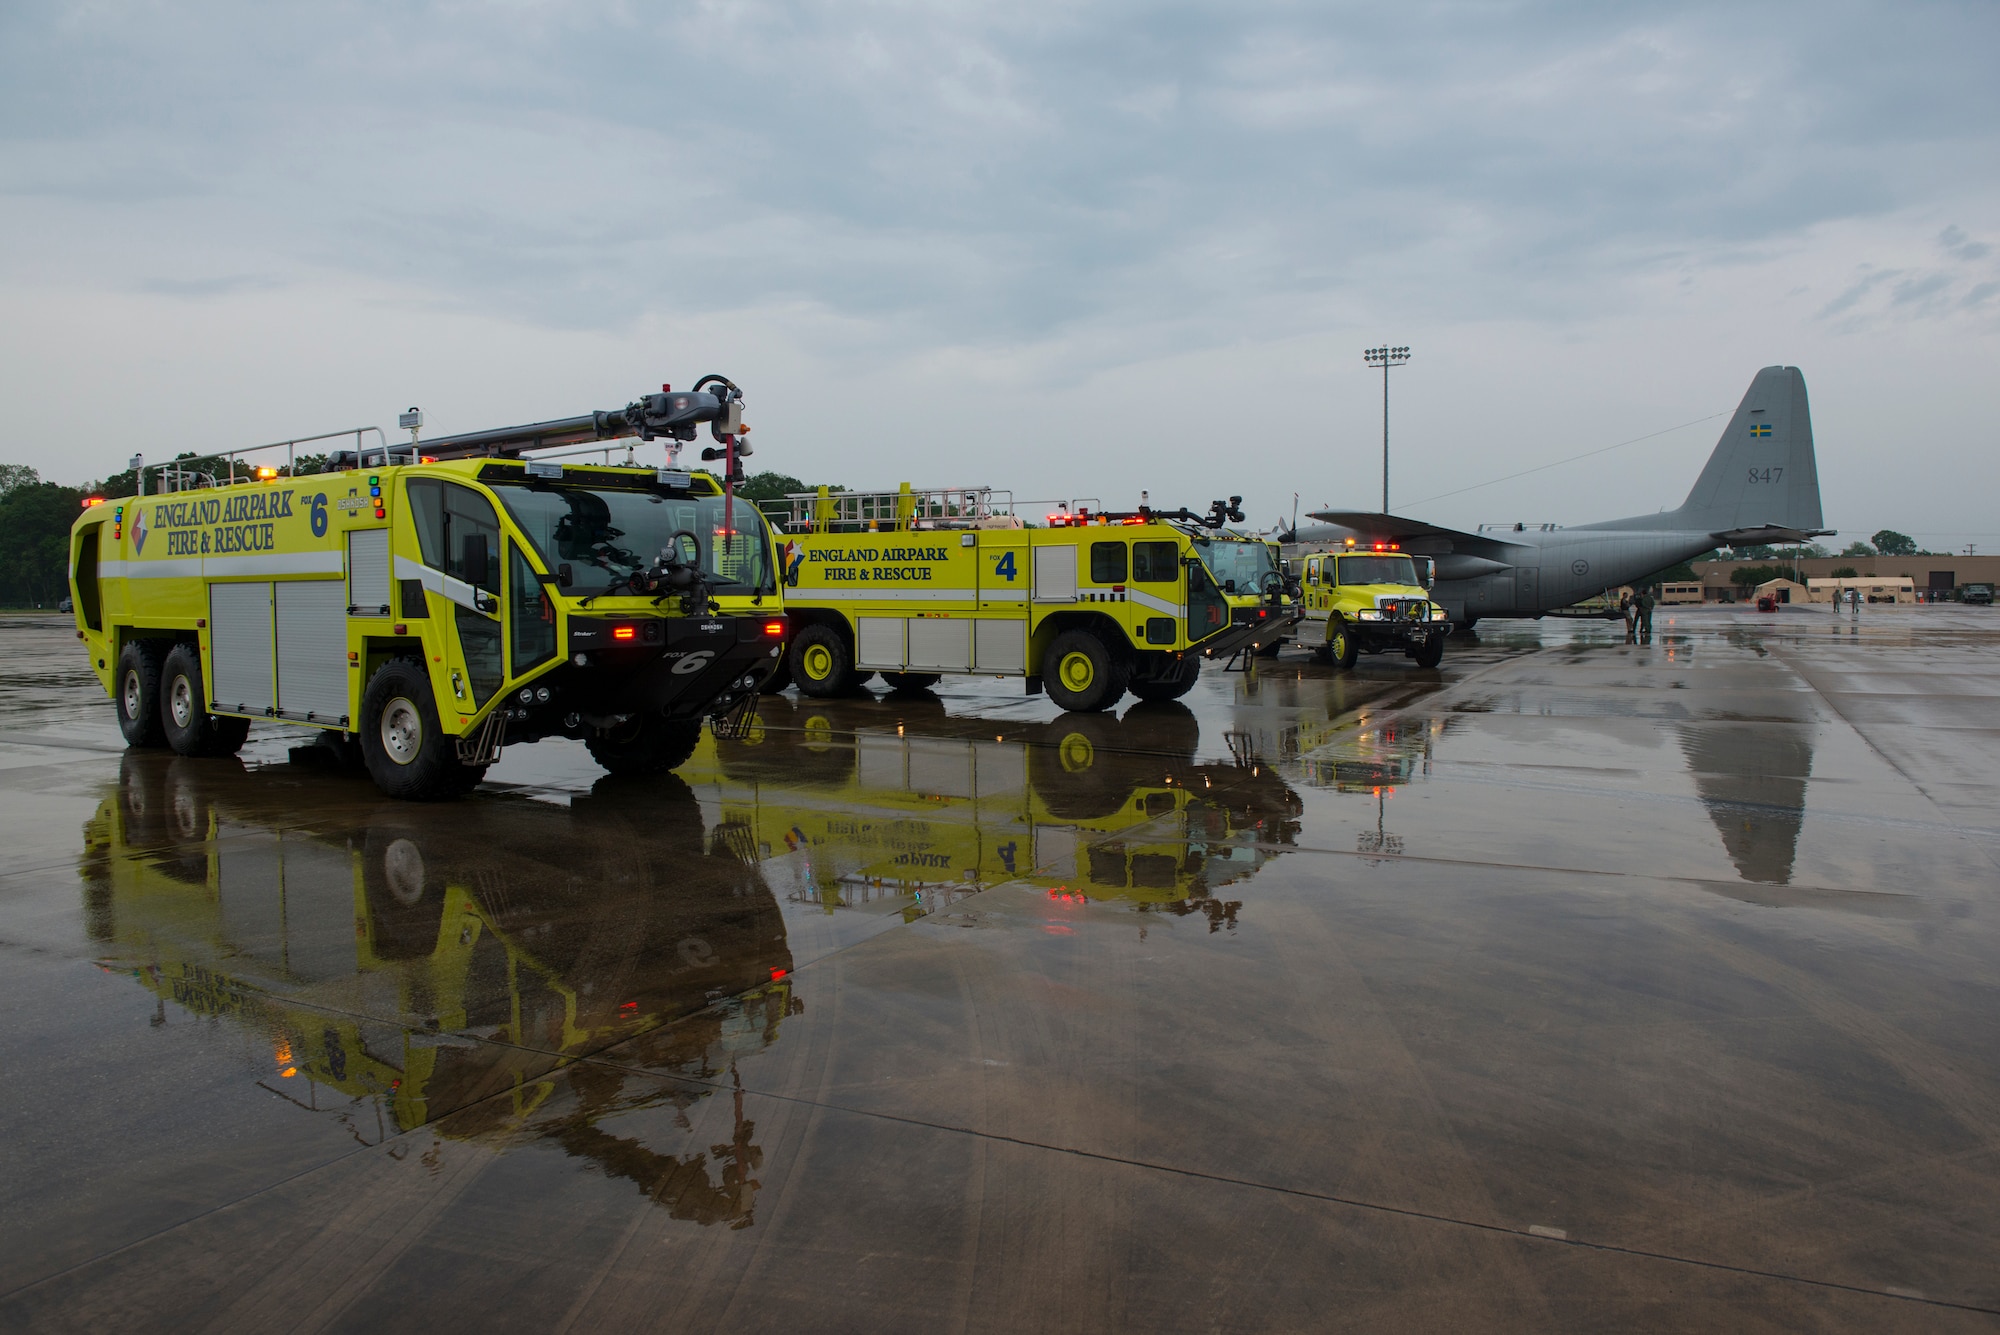 England Airpark fire and rescue trucks sit near a Swedish C-130 Hercules after an emergency response exercise during a Joint Readiness Training exercise at Alexandria International Airport, La. April 18, 2016. JRTC is a multinational exercise focused on pre-deployment and airdrop capabilities. (U.S. Air Force photo by Senior Airman Joshua King)